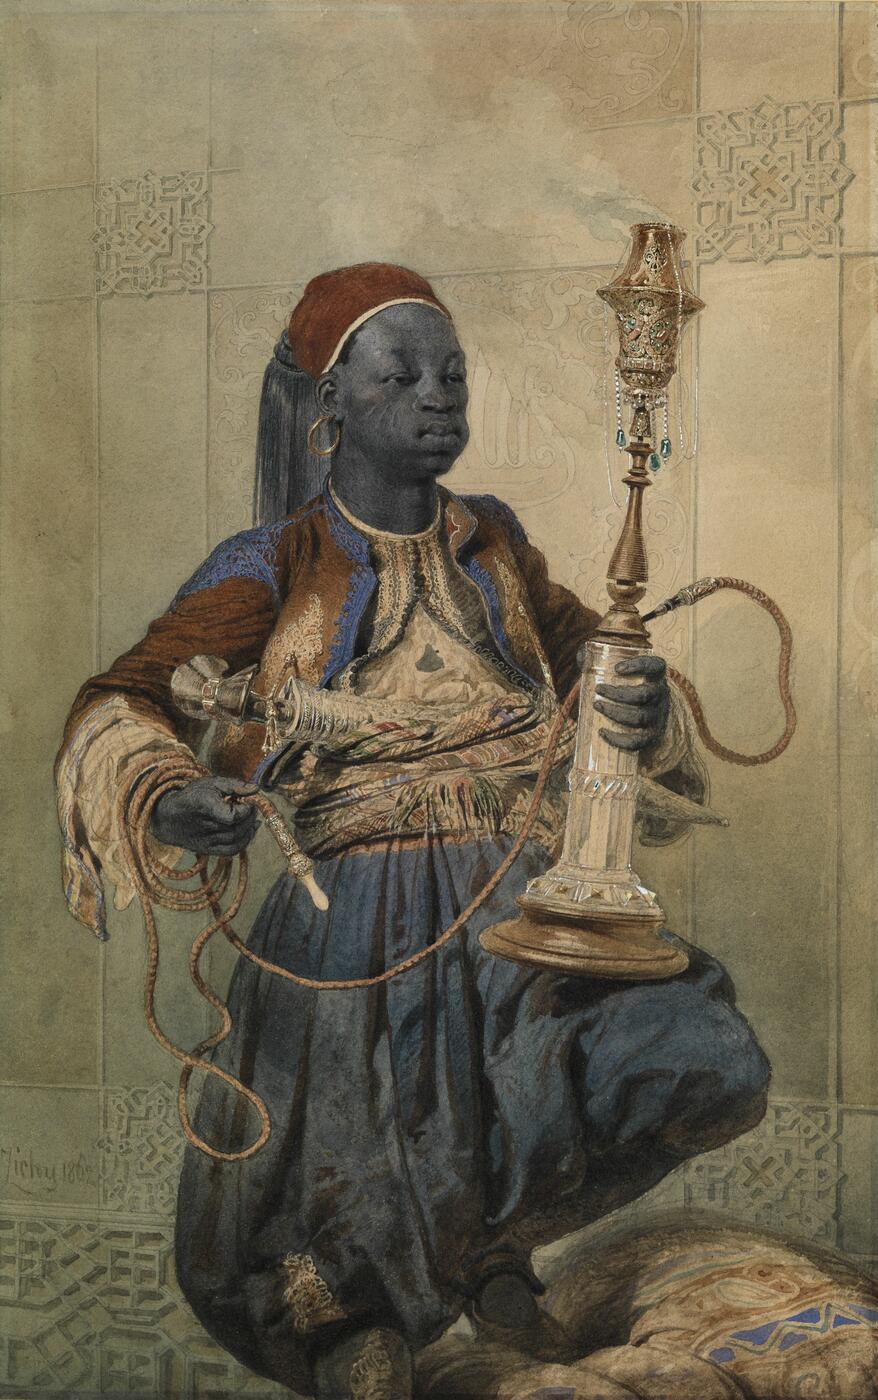 Nubian with a Waterpipe